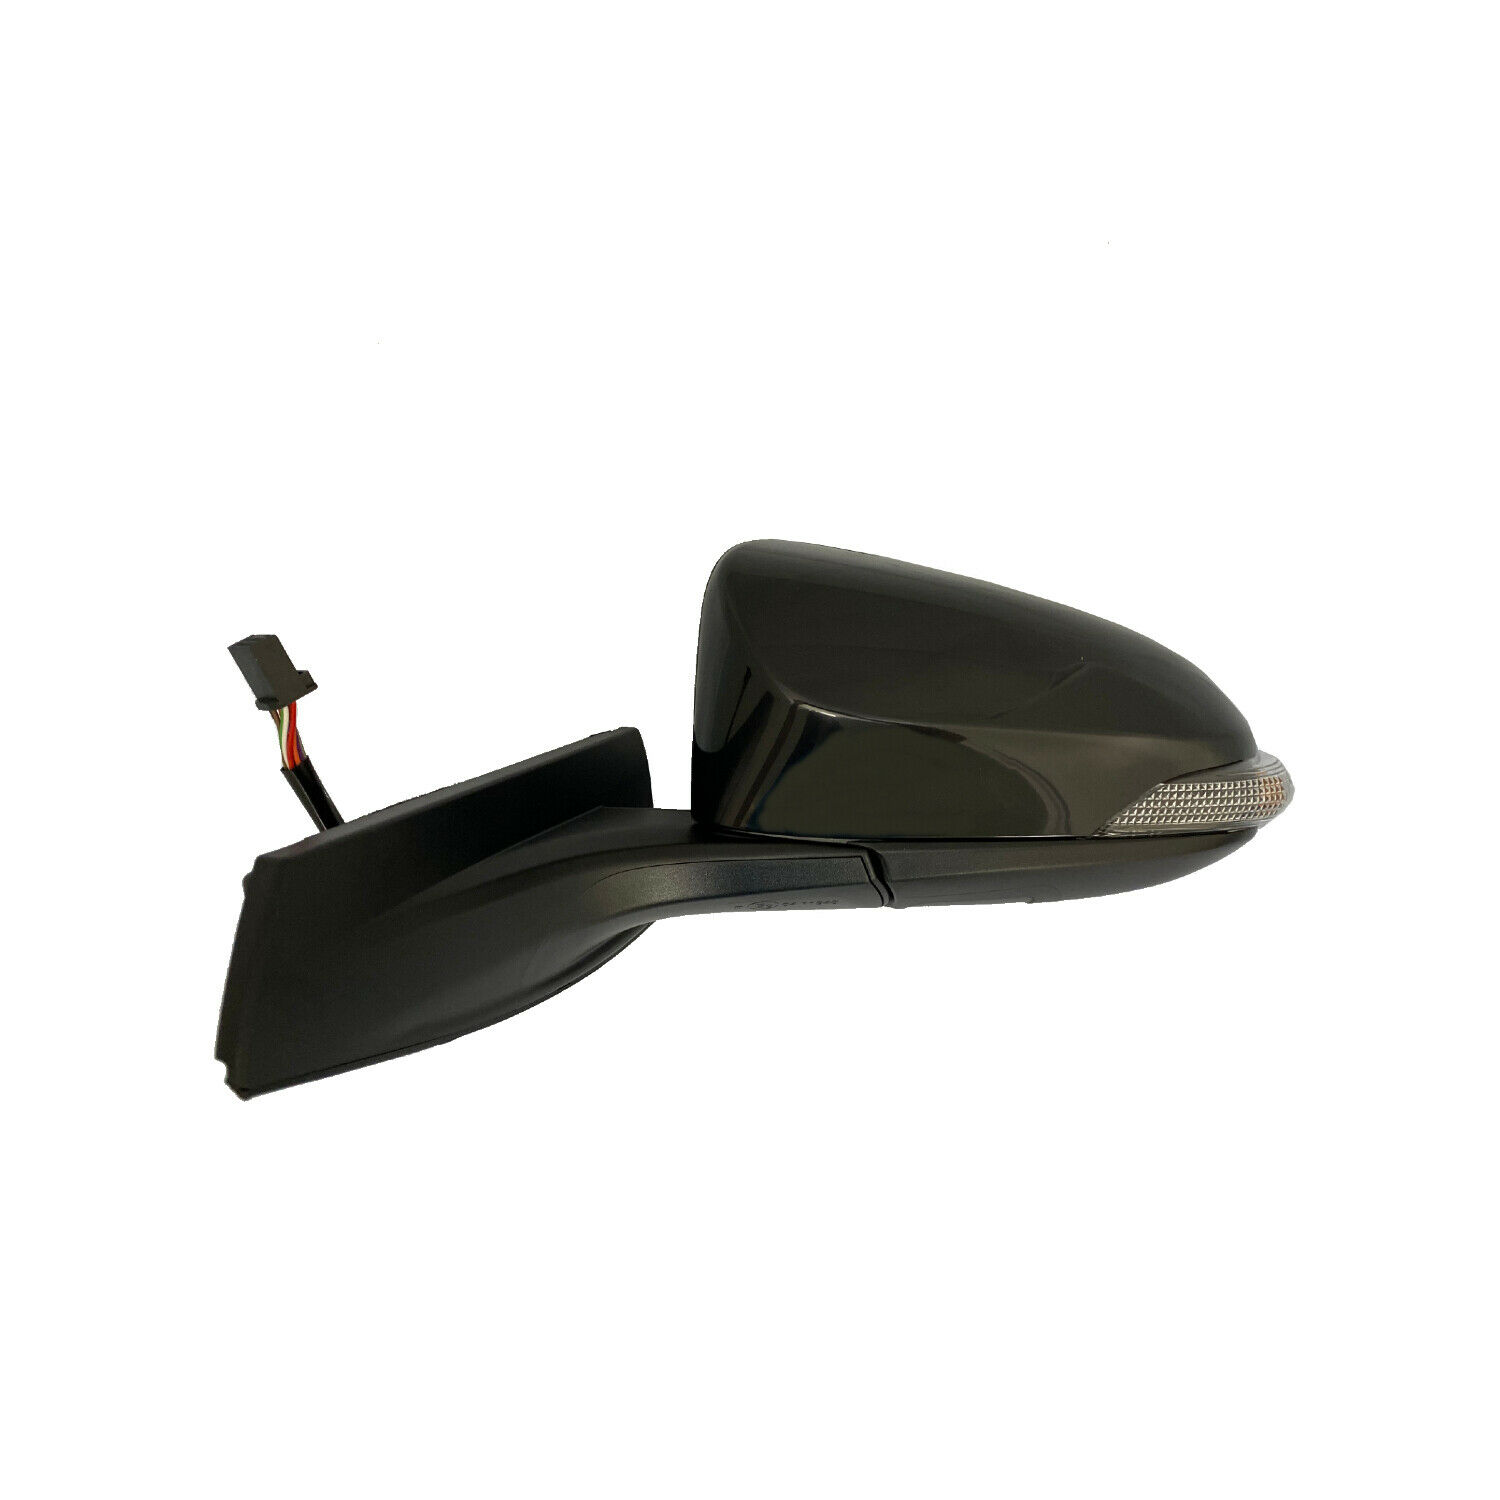 Aftermarket MIRRORS for TOYOTA - C-HR, C-HR,18-21,LT Mirror outside rear view